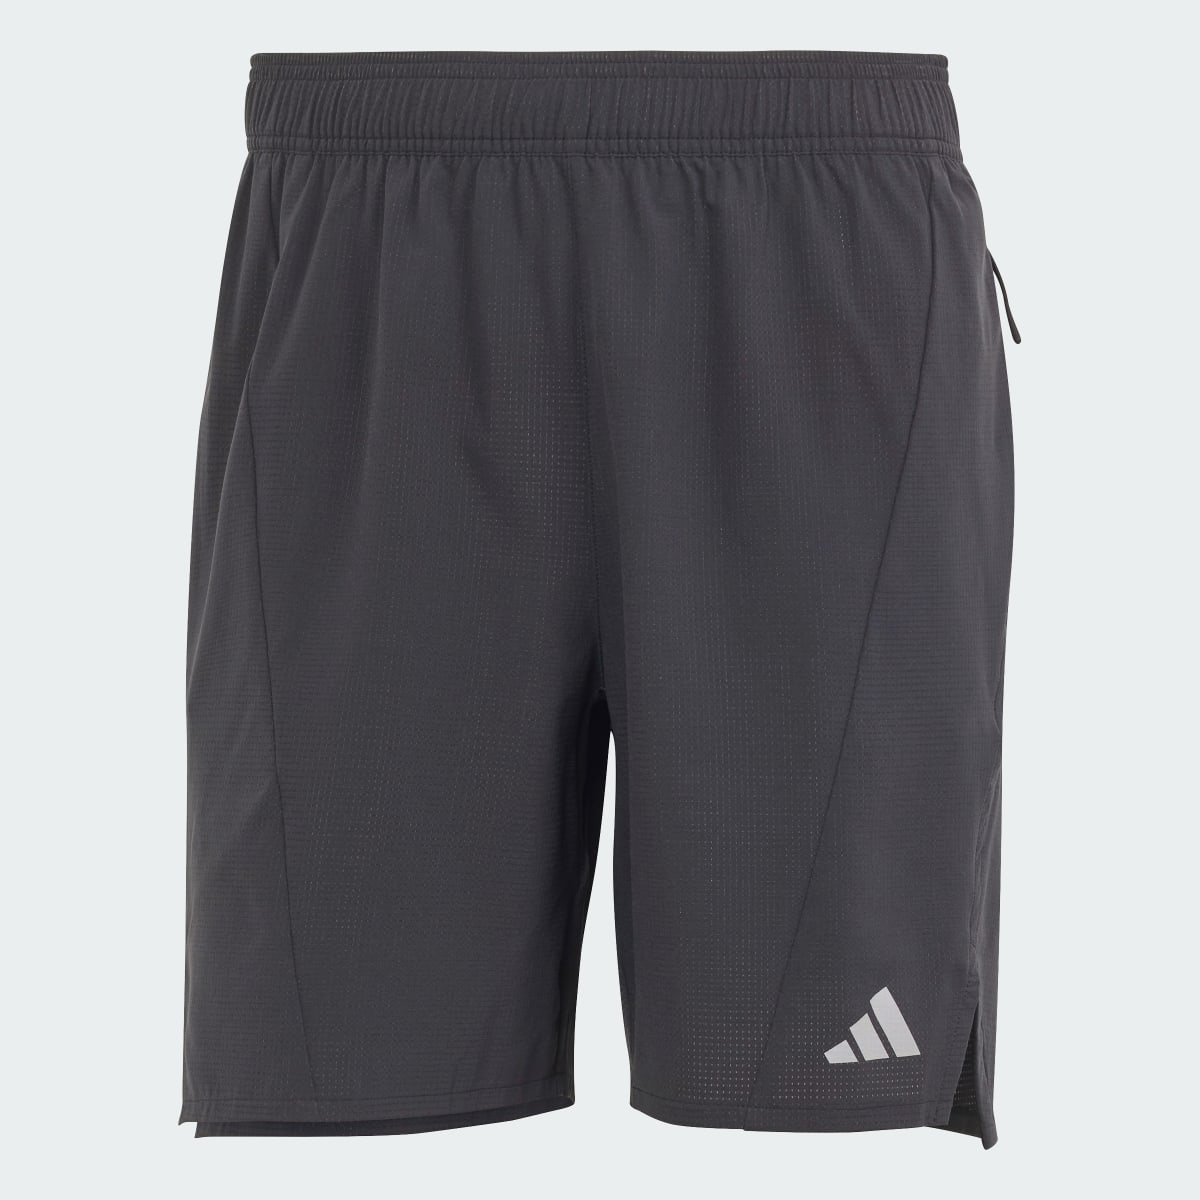 Adidas Short Designed for Training HIIT Workout HEAT.RDY. 4